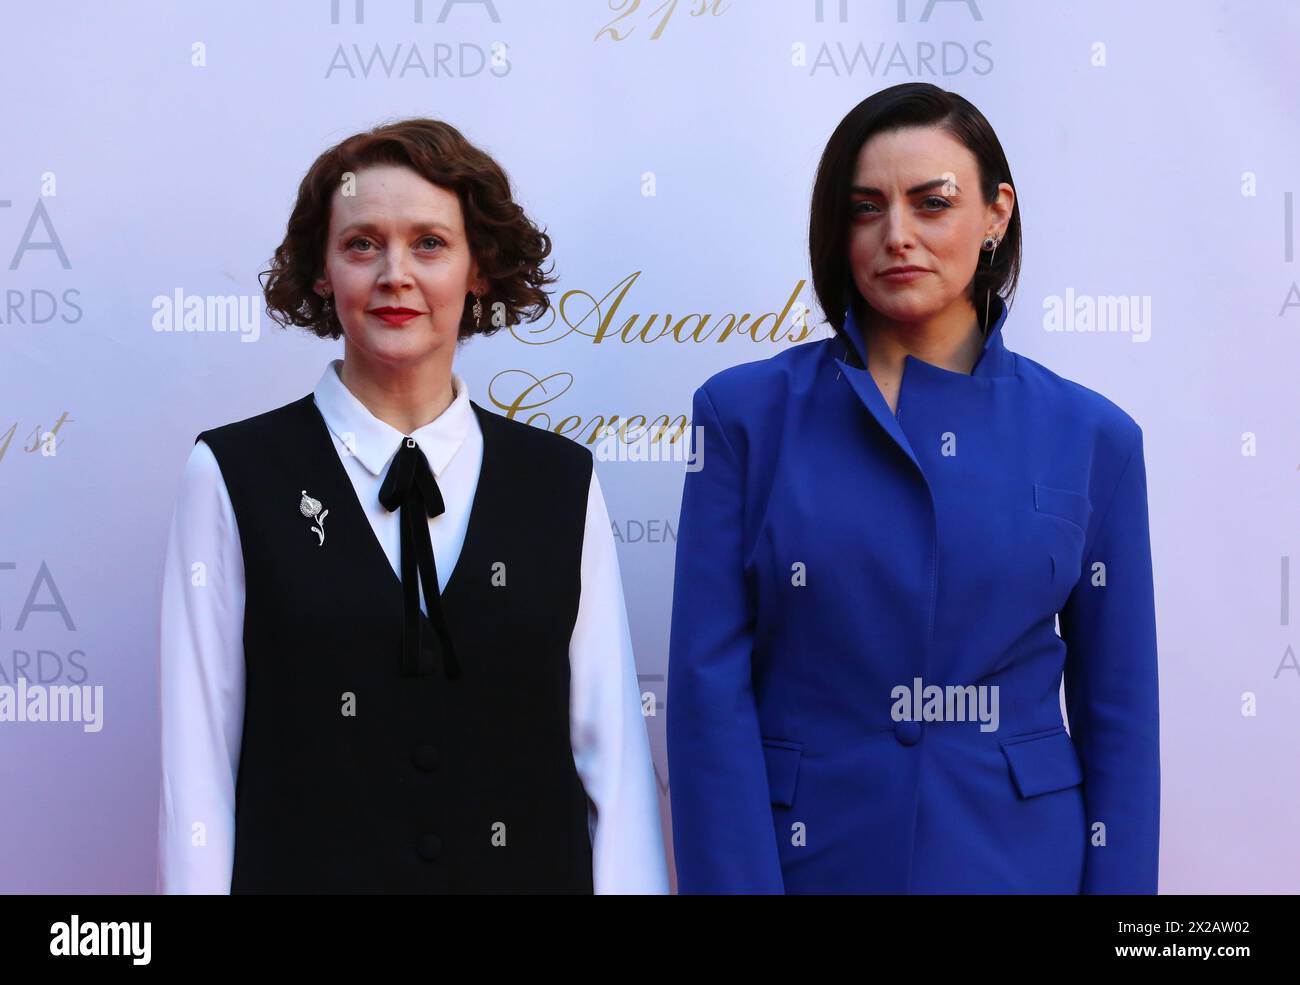 Dublin, Ireland. 20th April 2024.  Simone Kirby and Nora-Jane Noone arriving on the red carpet at the Irish Film and Television Awards (IFTA), Dublin Royal Convention Centre. Credit: Doreen Kennedy/Alamy Live News. Stock Photo